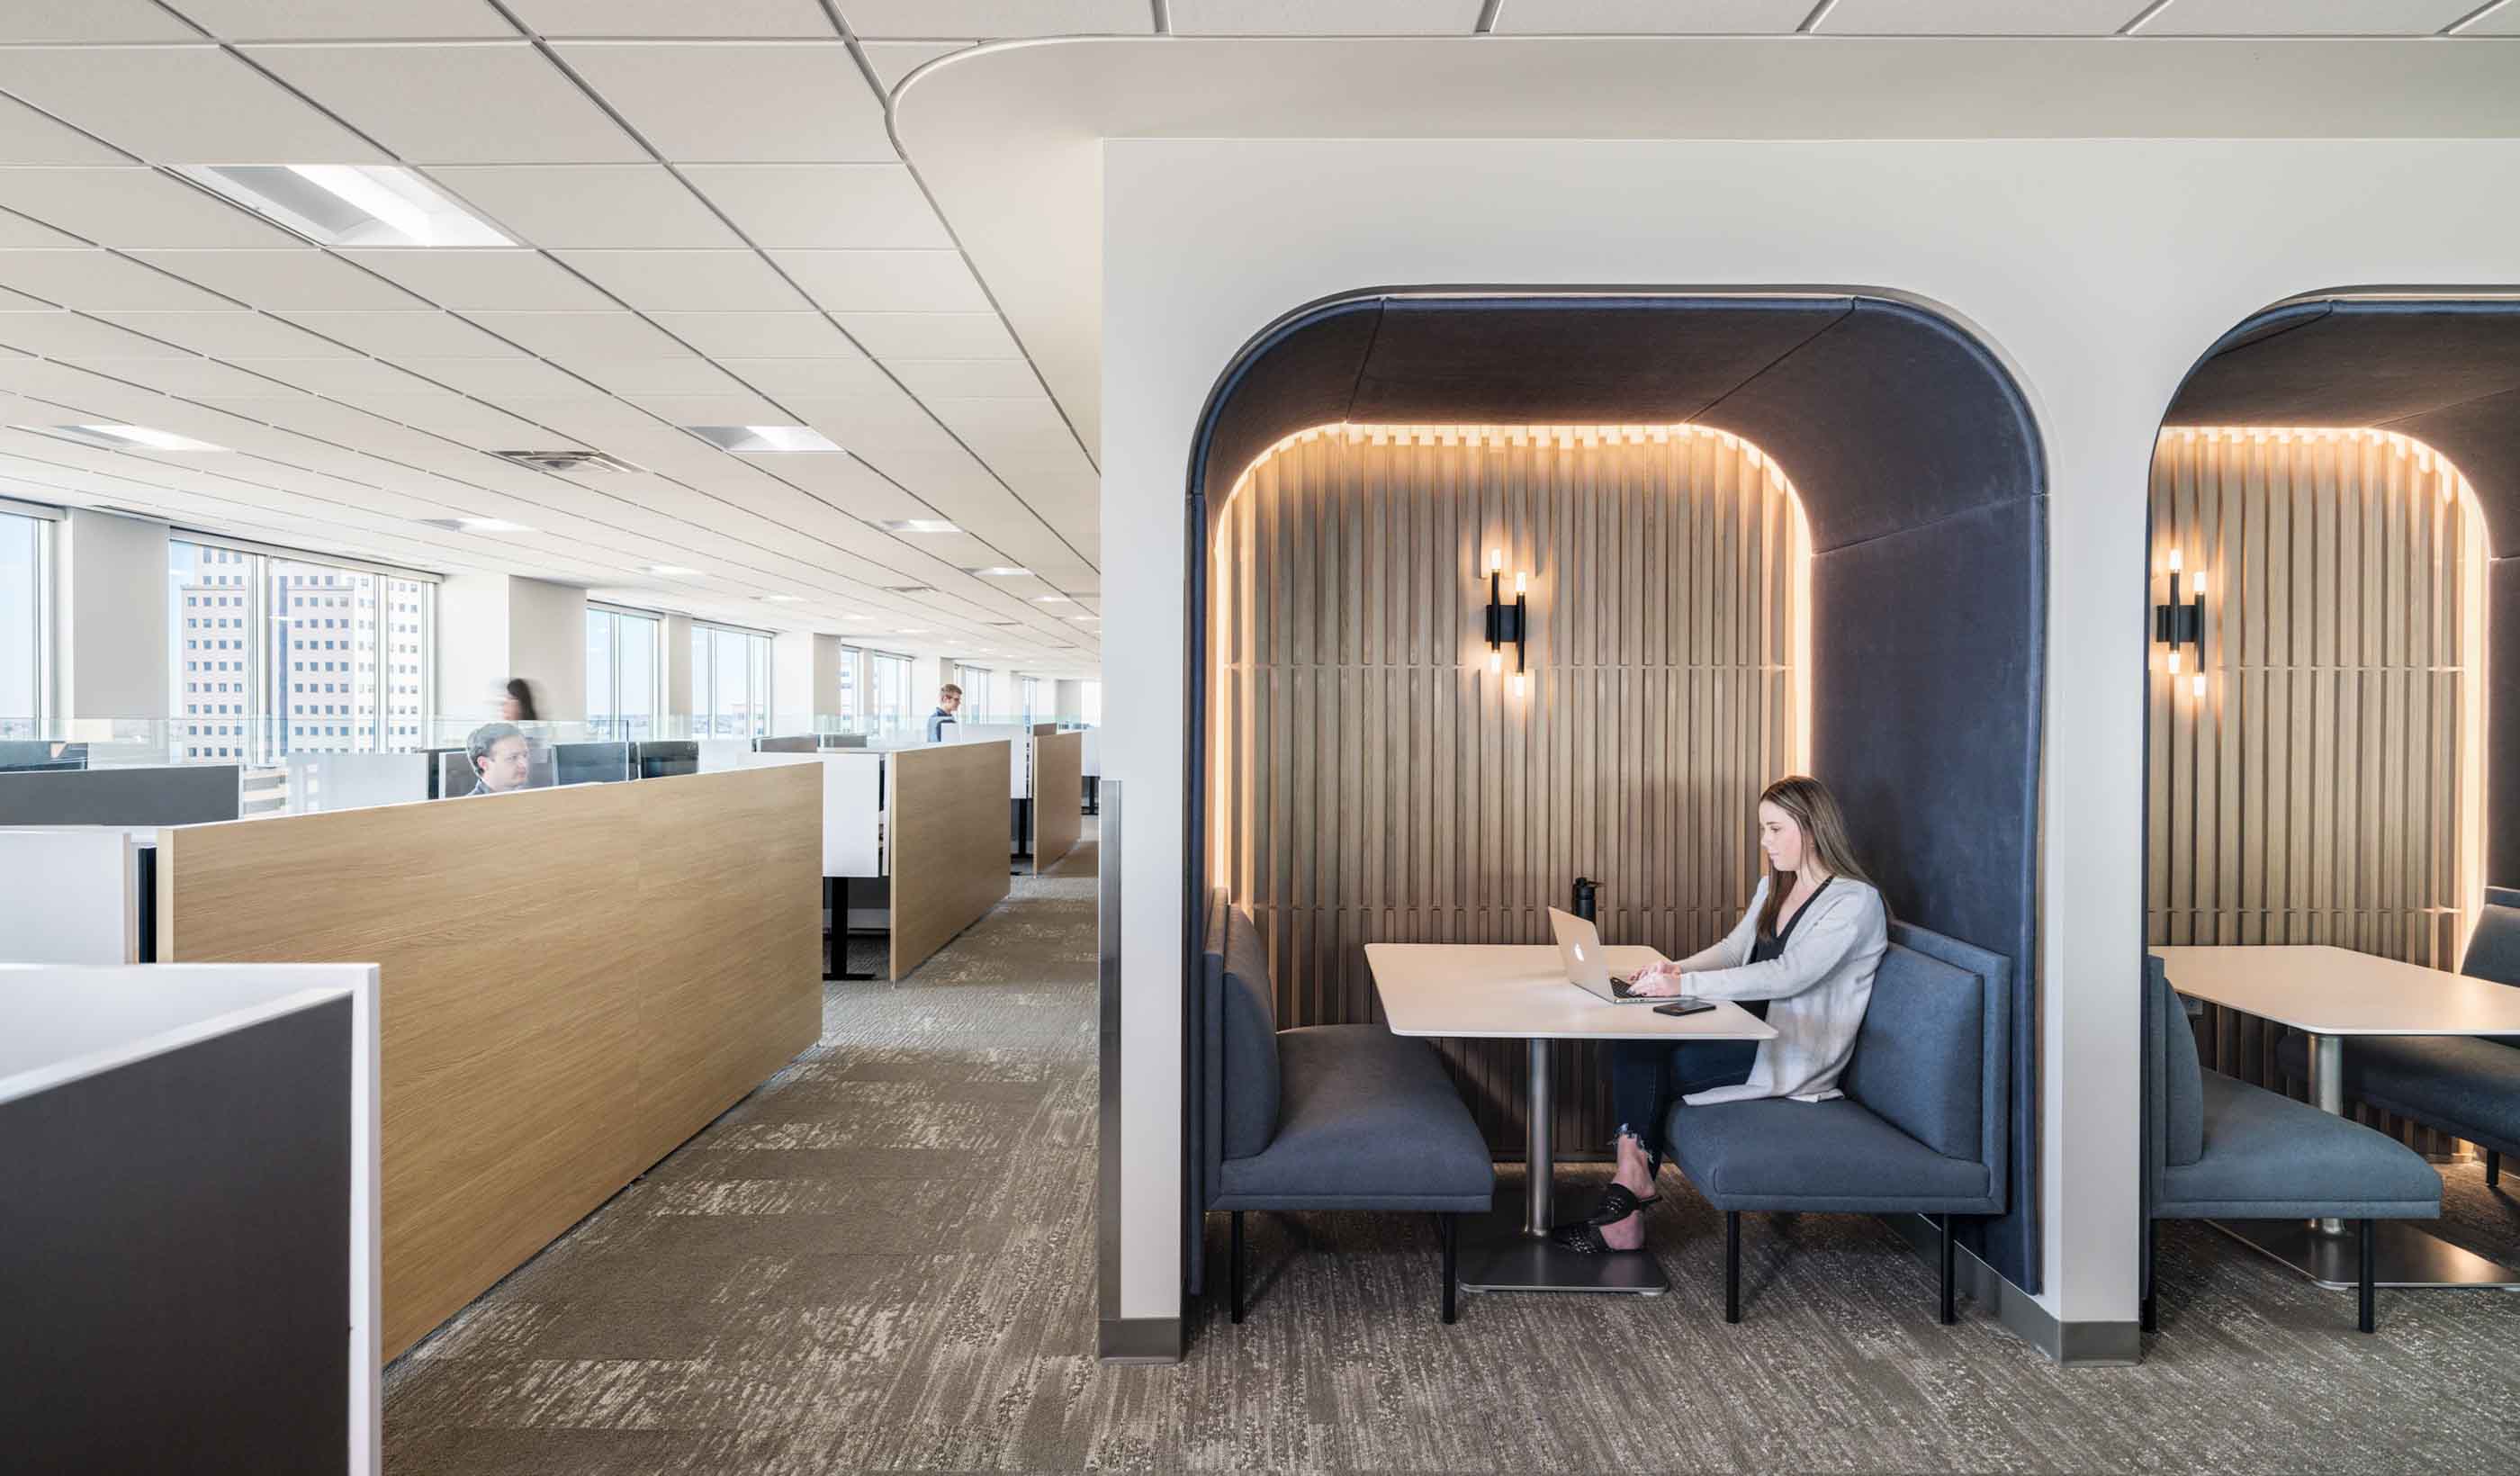 Workplace Reboot: There's more to lighting design than meets the eye